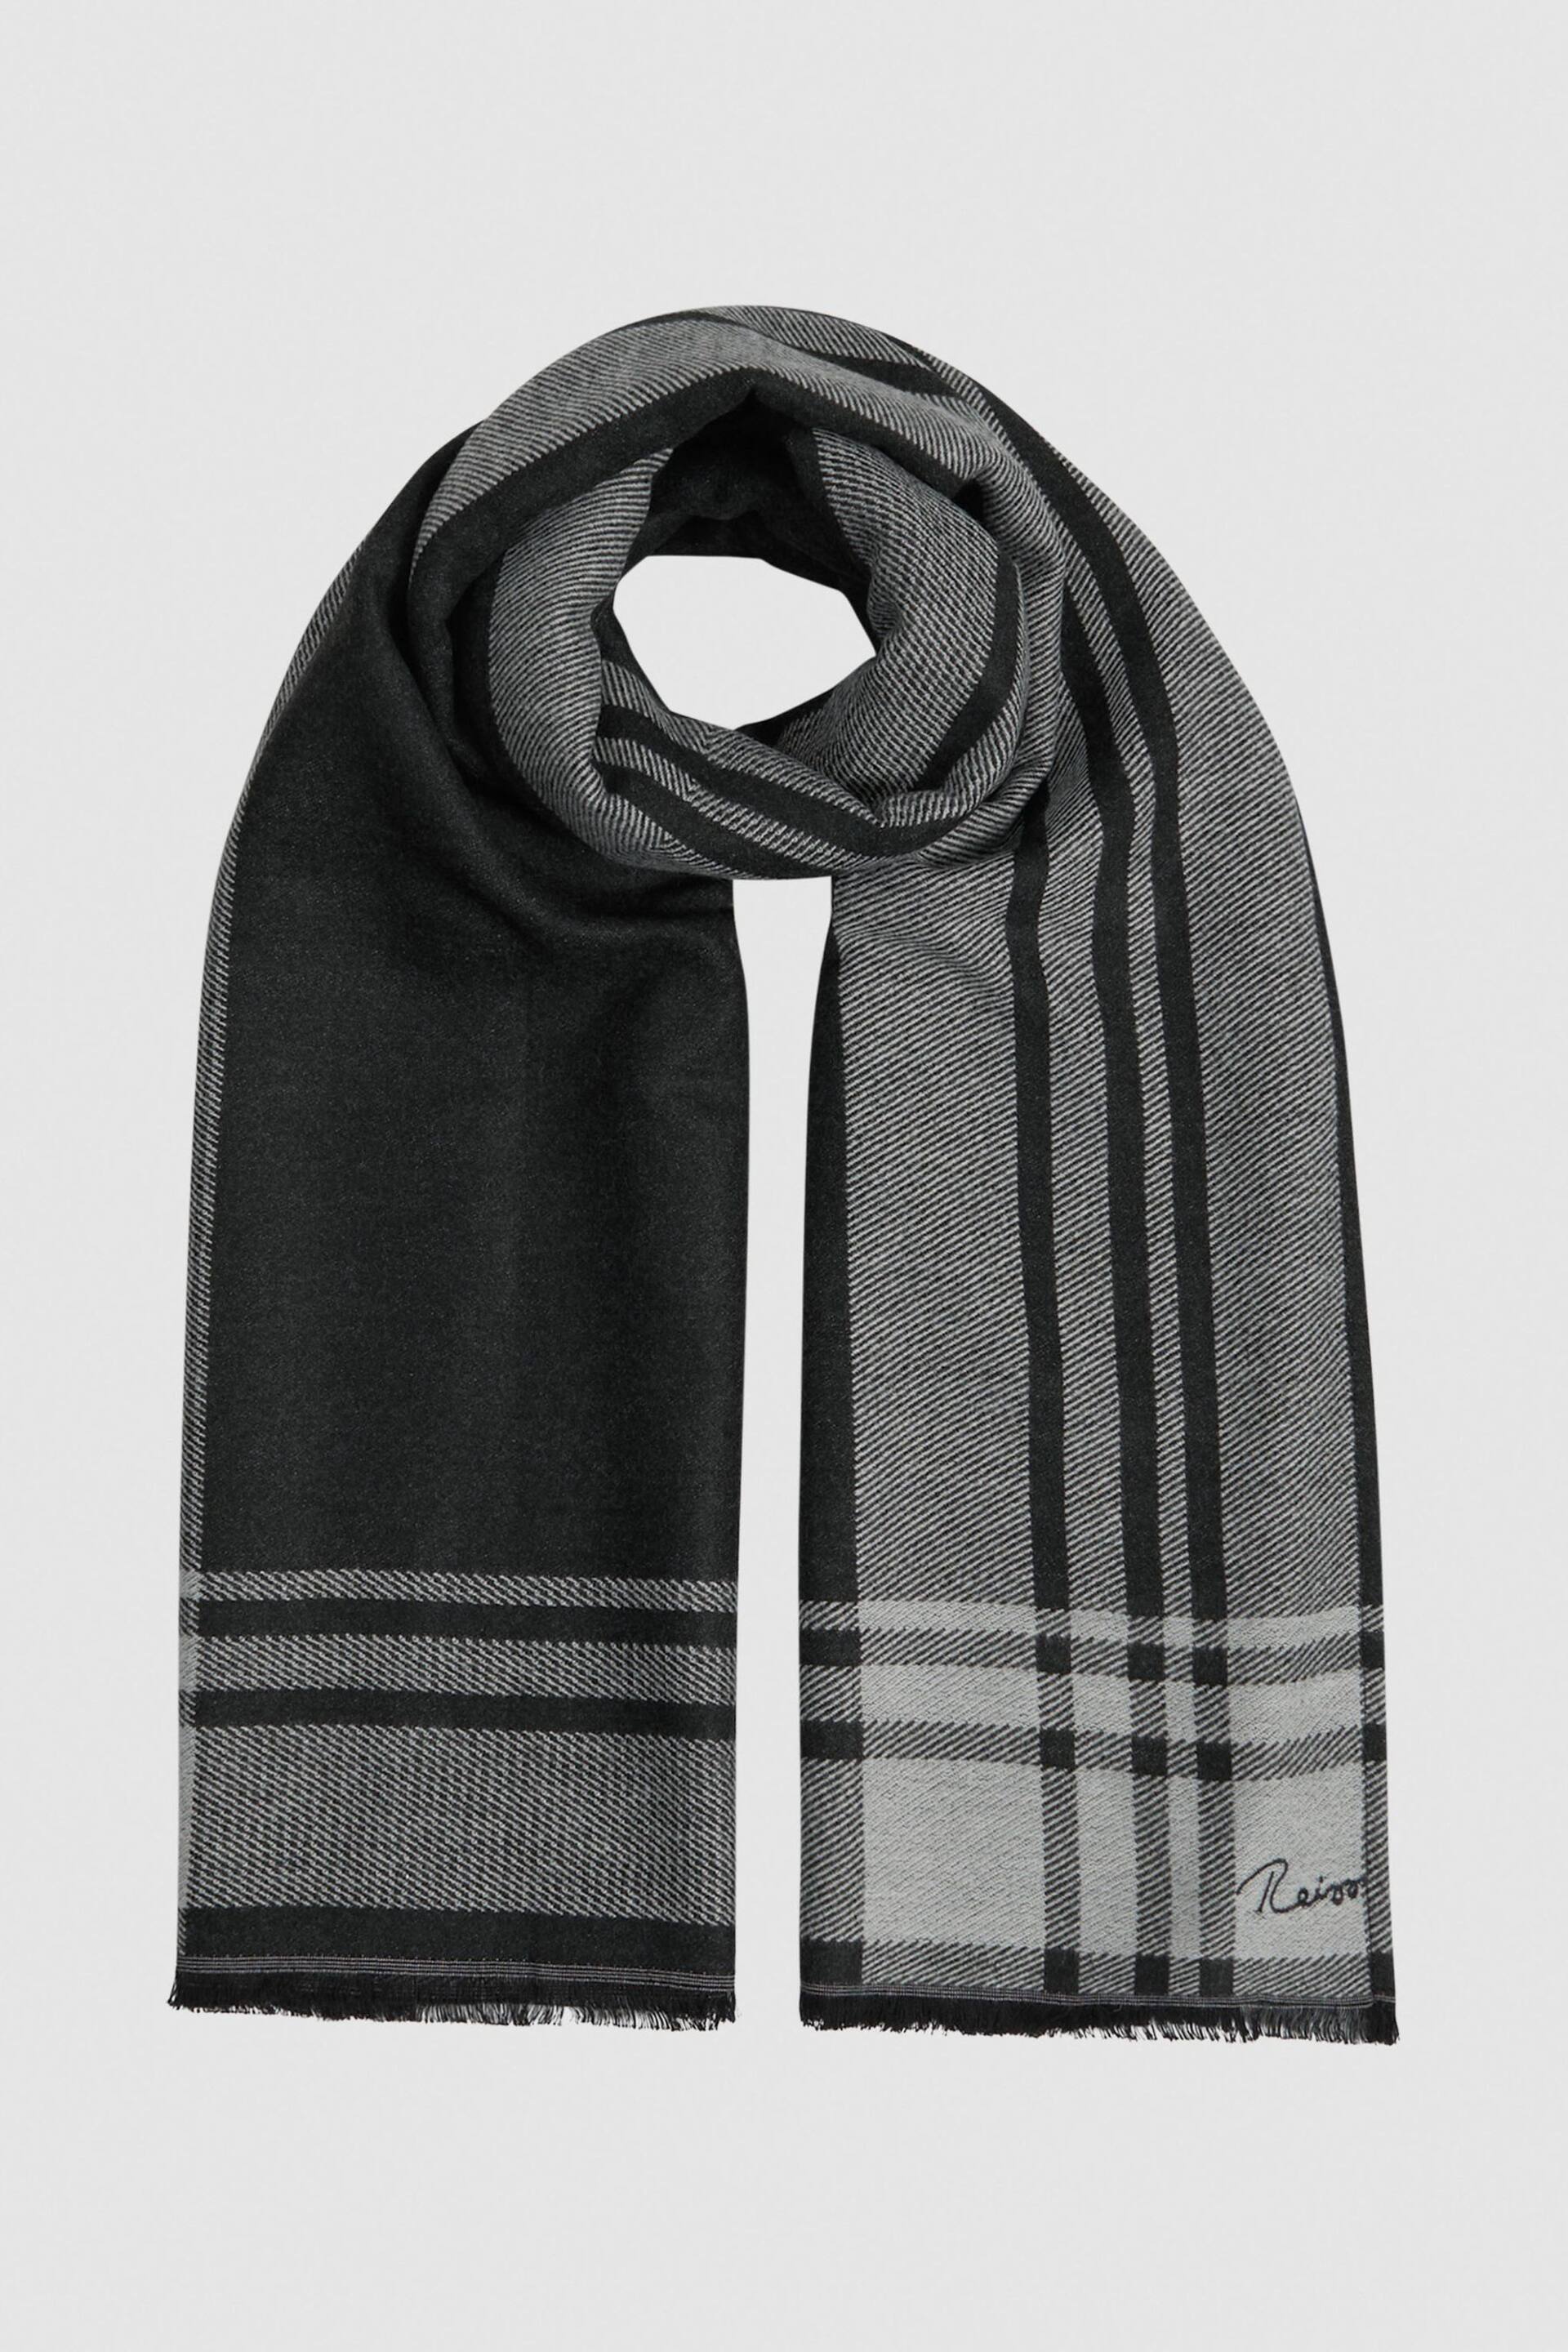 Reiss Black/White Clara Checked Embroidered Scarf - Image 3 of 4